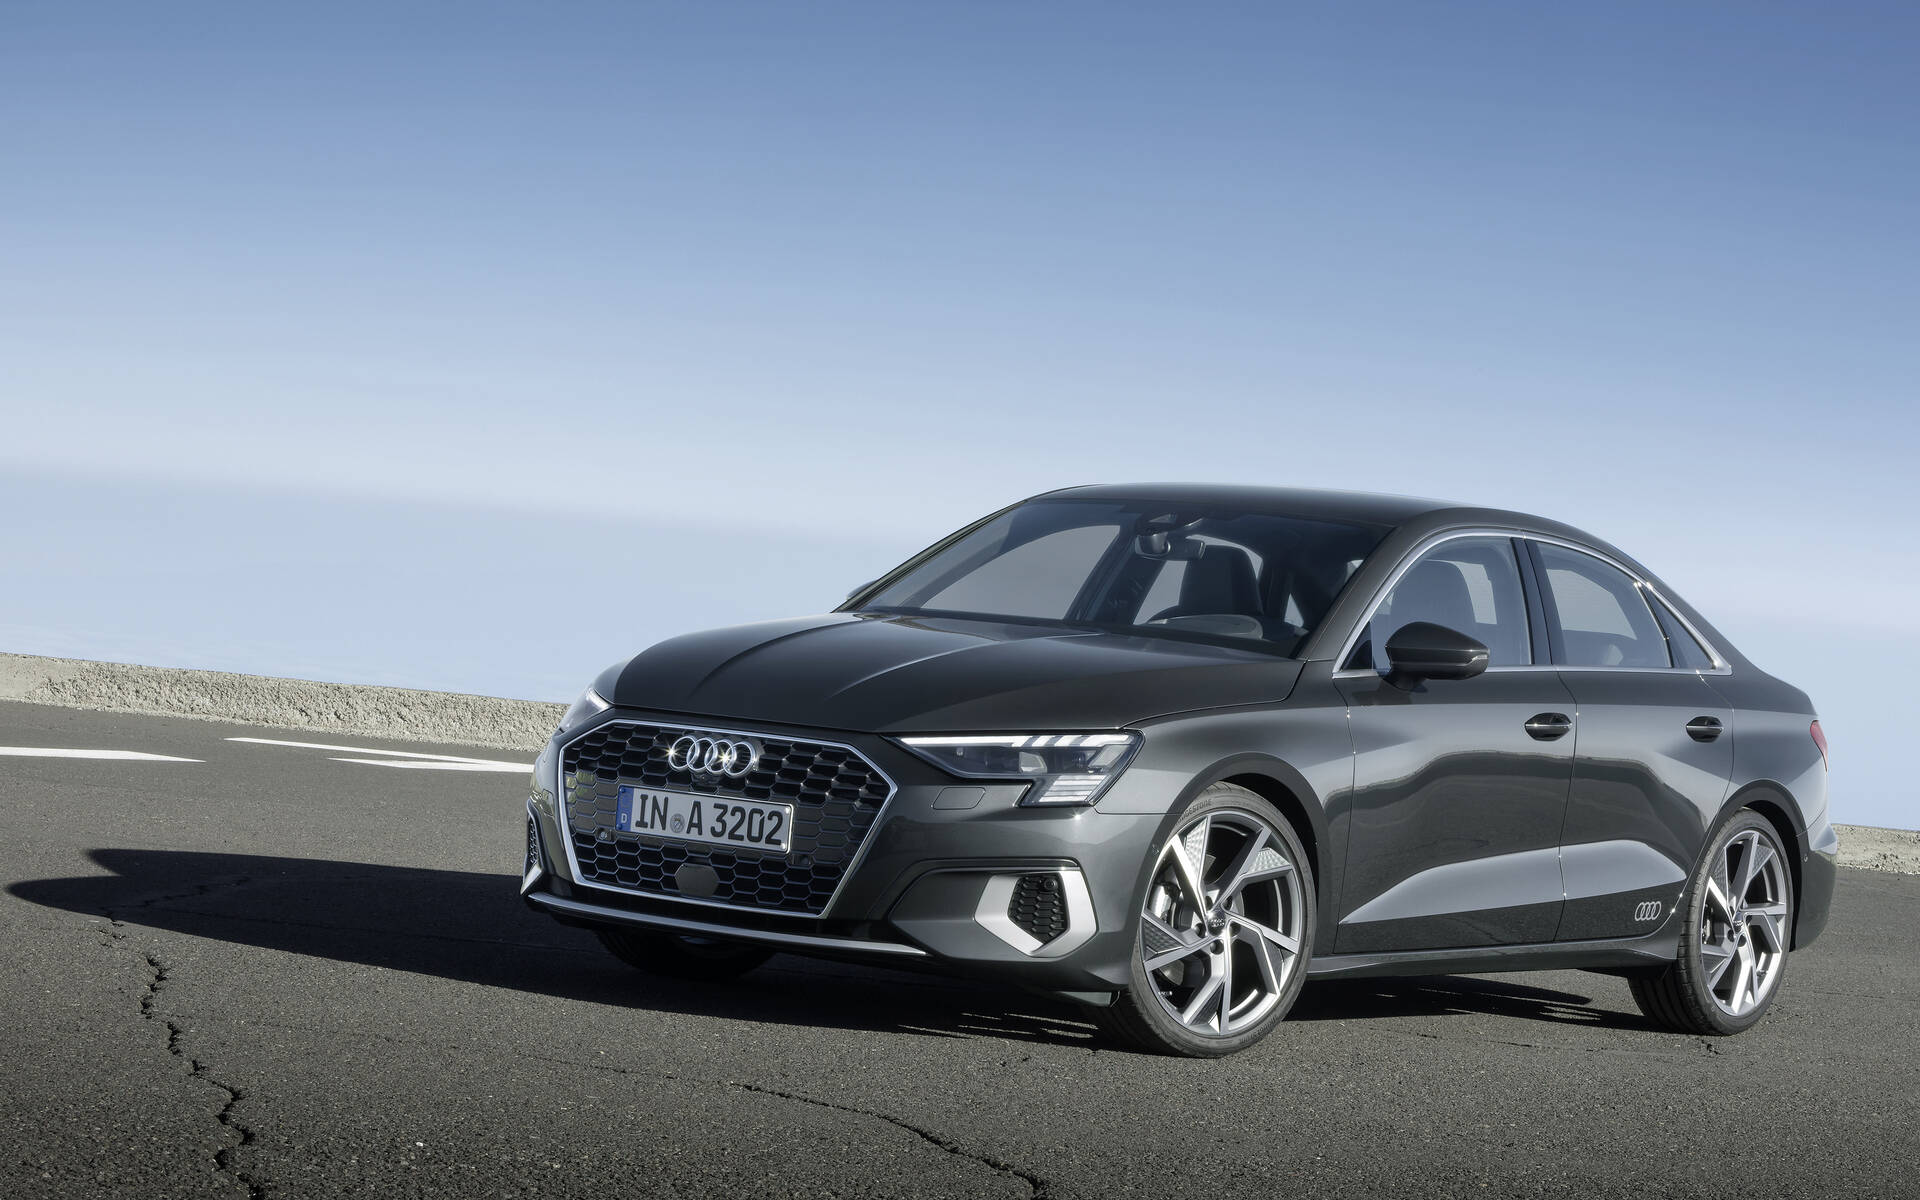 2016 Audi A3 - News, reviews, picture galleries and videos - The Car Guide